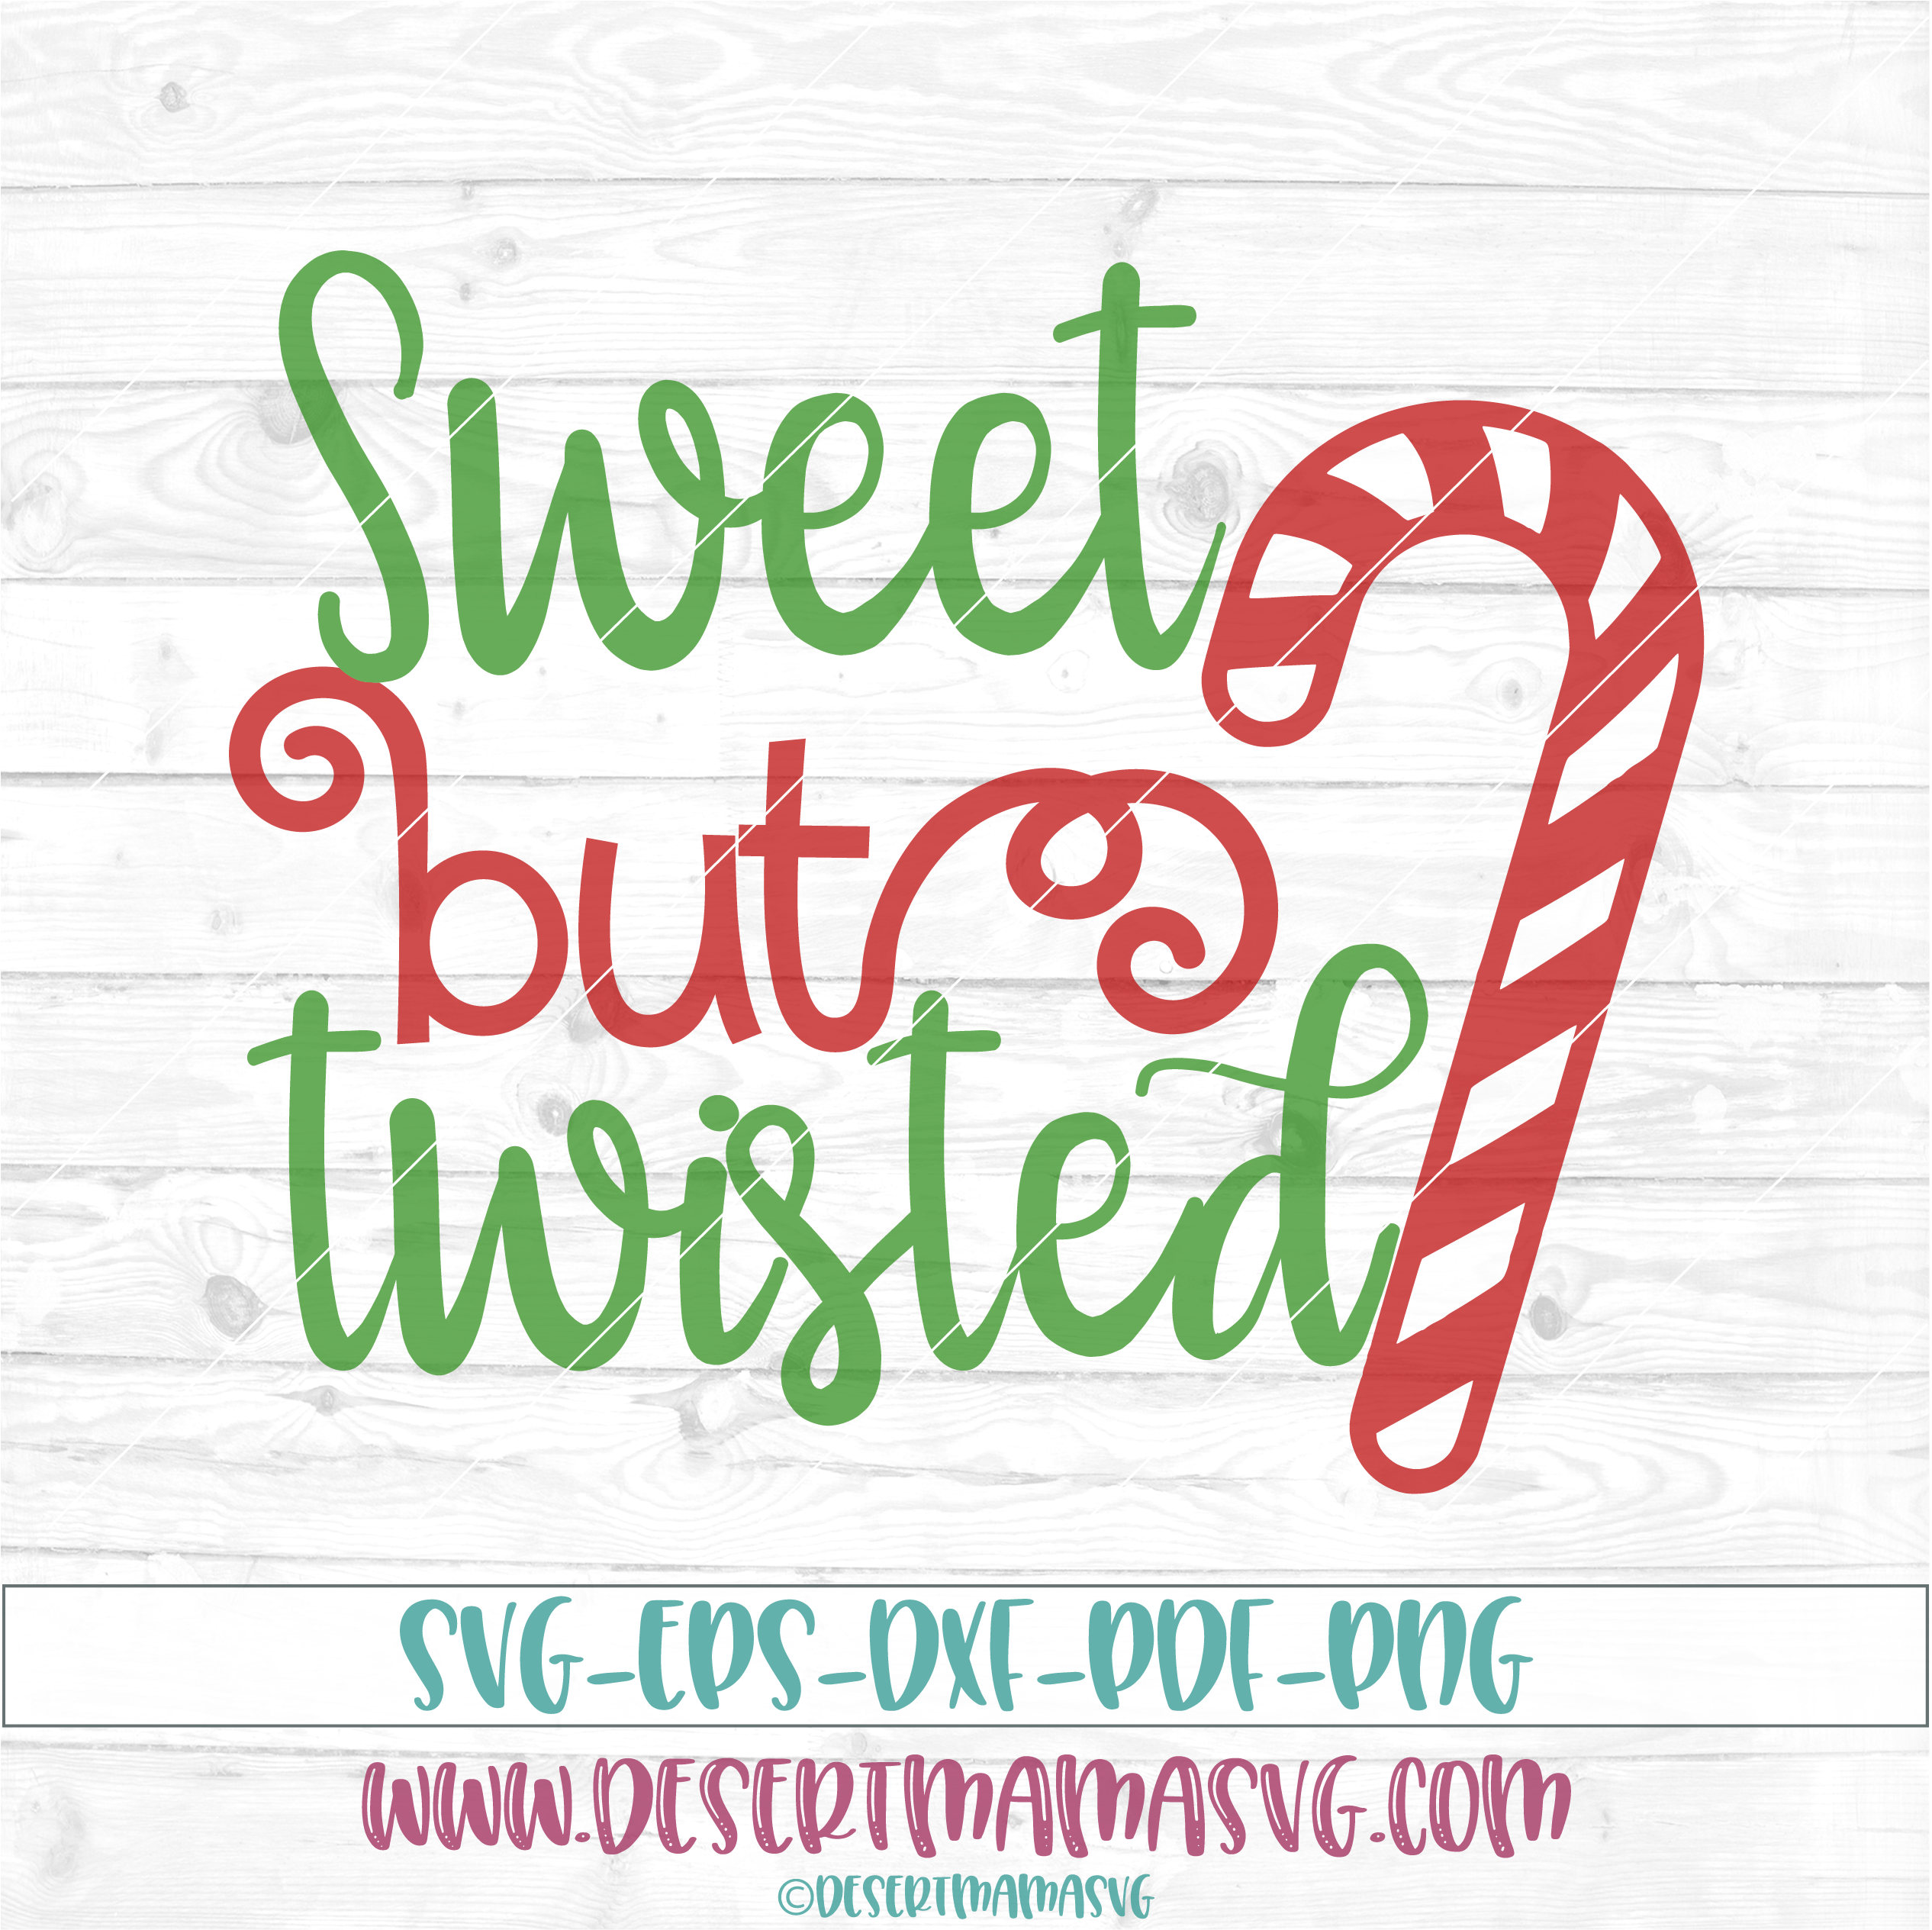 Download Sweet but twisted SVG eps dxf png cricut cameo scan N